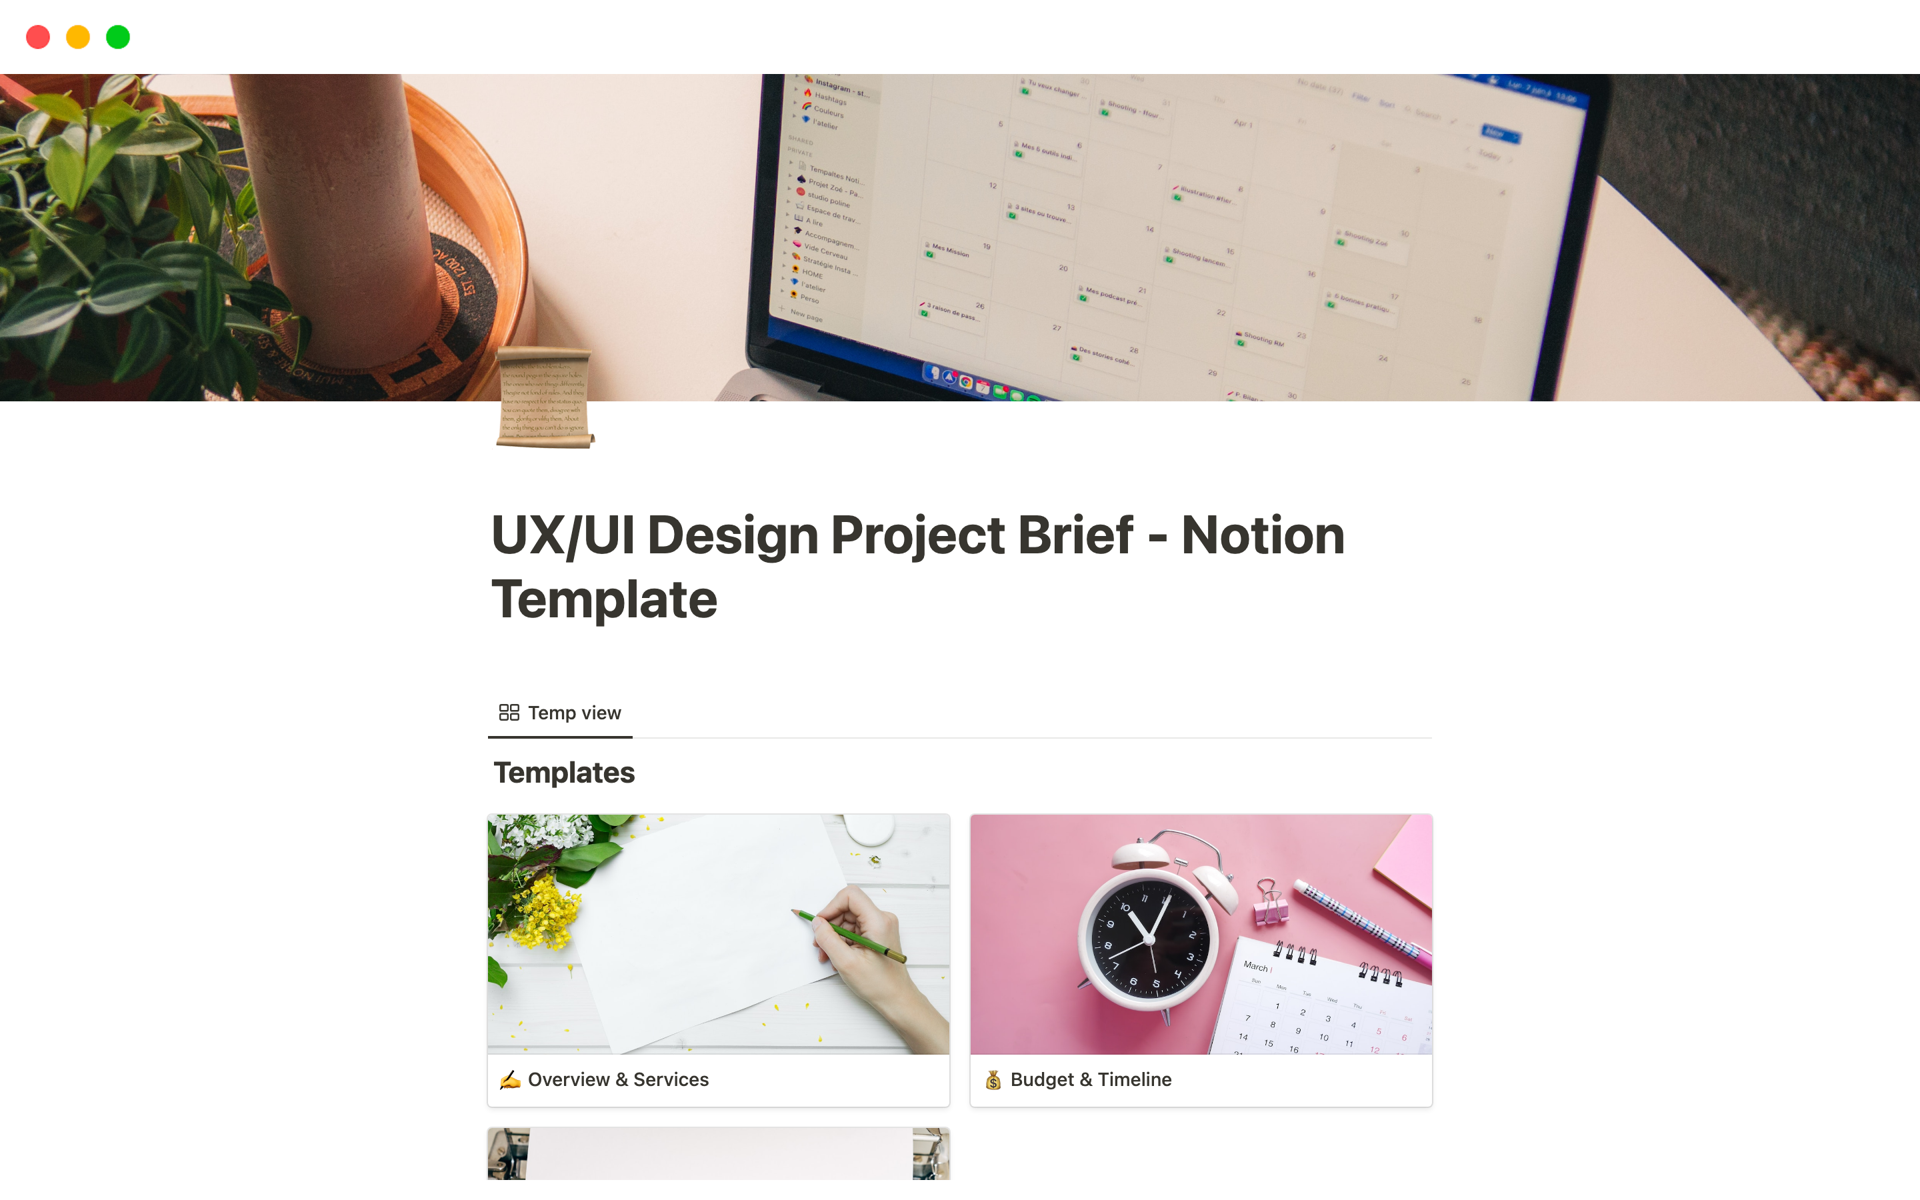 A template preview for UX/UI Design Project Brief